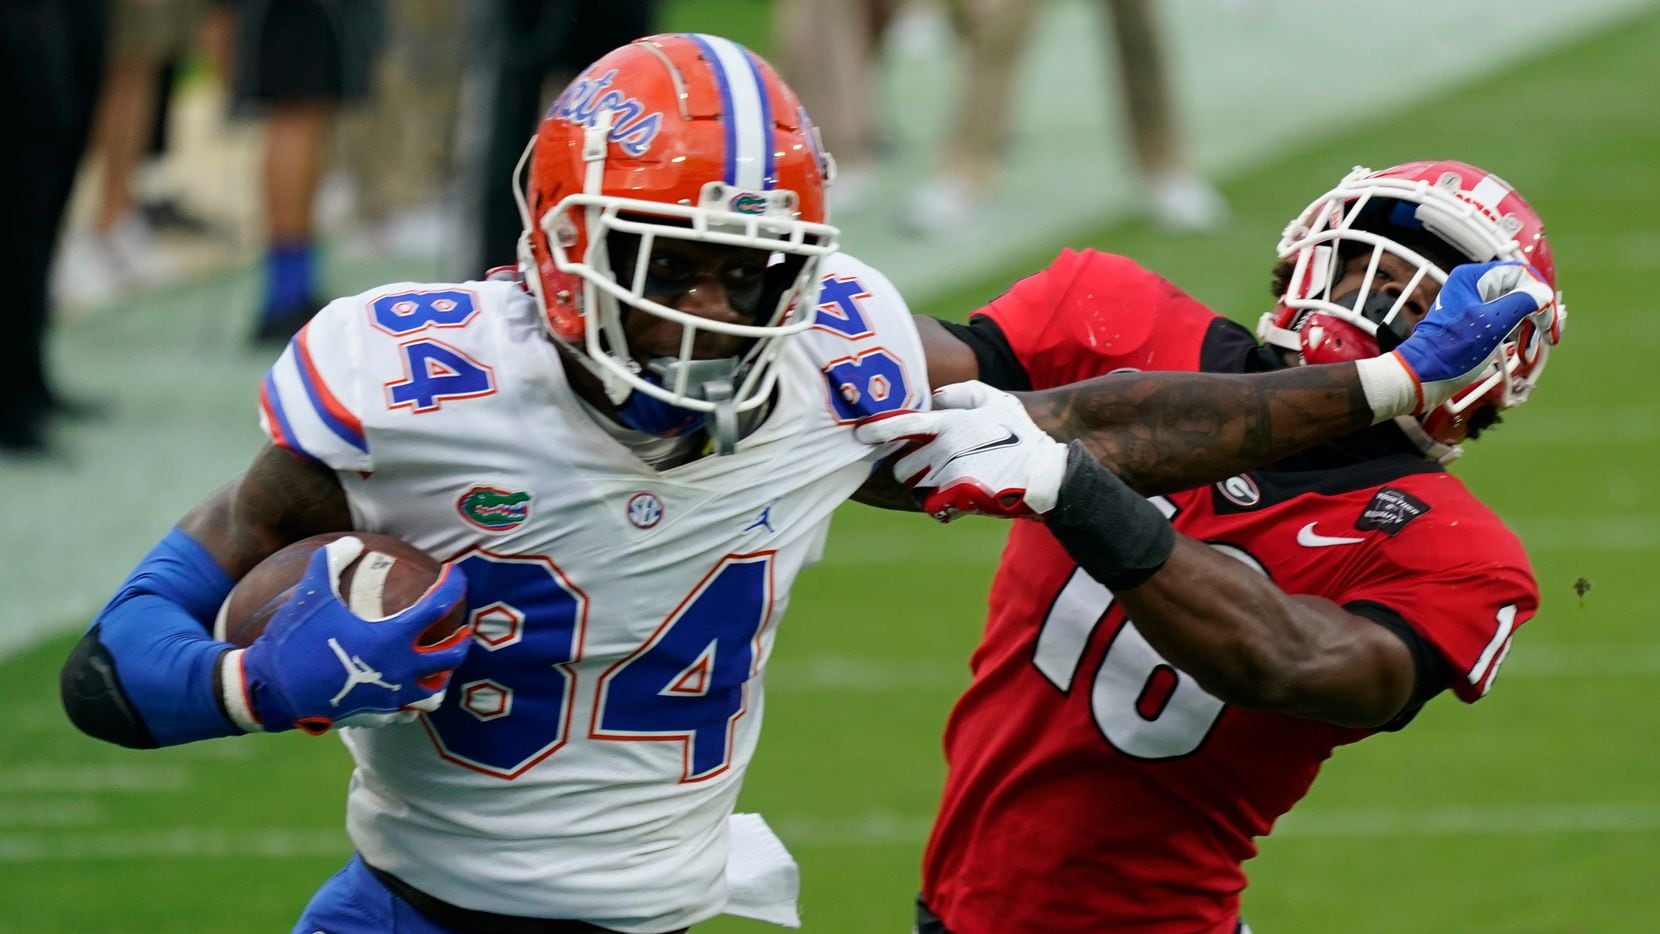 FILE - Florida tight end Kyle Pitts (84) tires to get past Georgia defensive back Lewis Cine (16) after a reception during the first half of an NCAA college football game in Jacksonville, Fla., in this Saturday, Nov. 7, 2020, file photo.